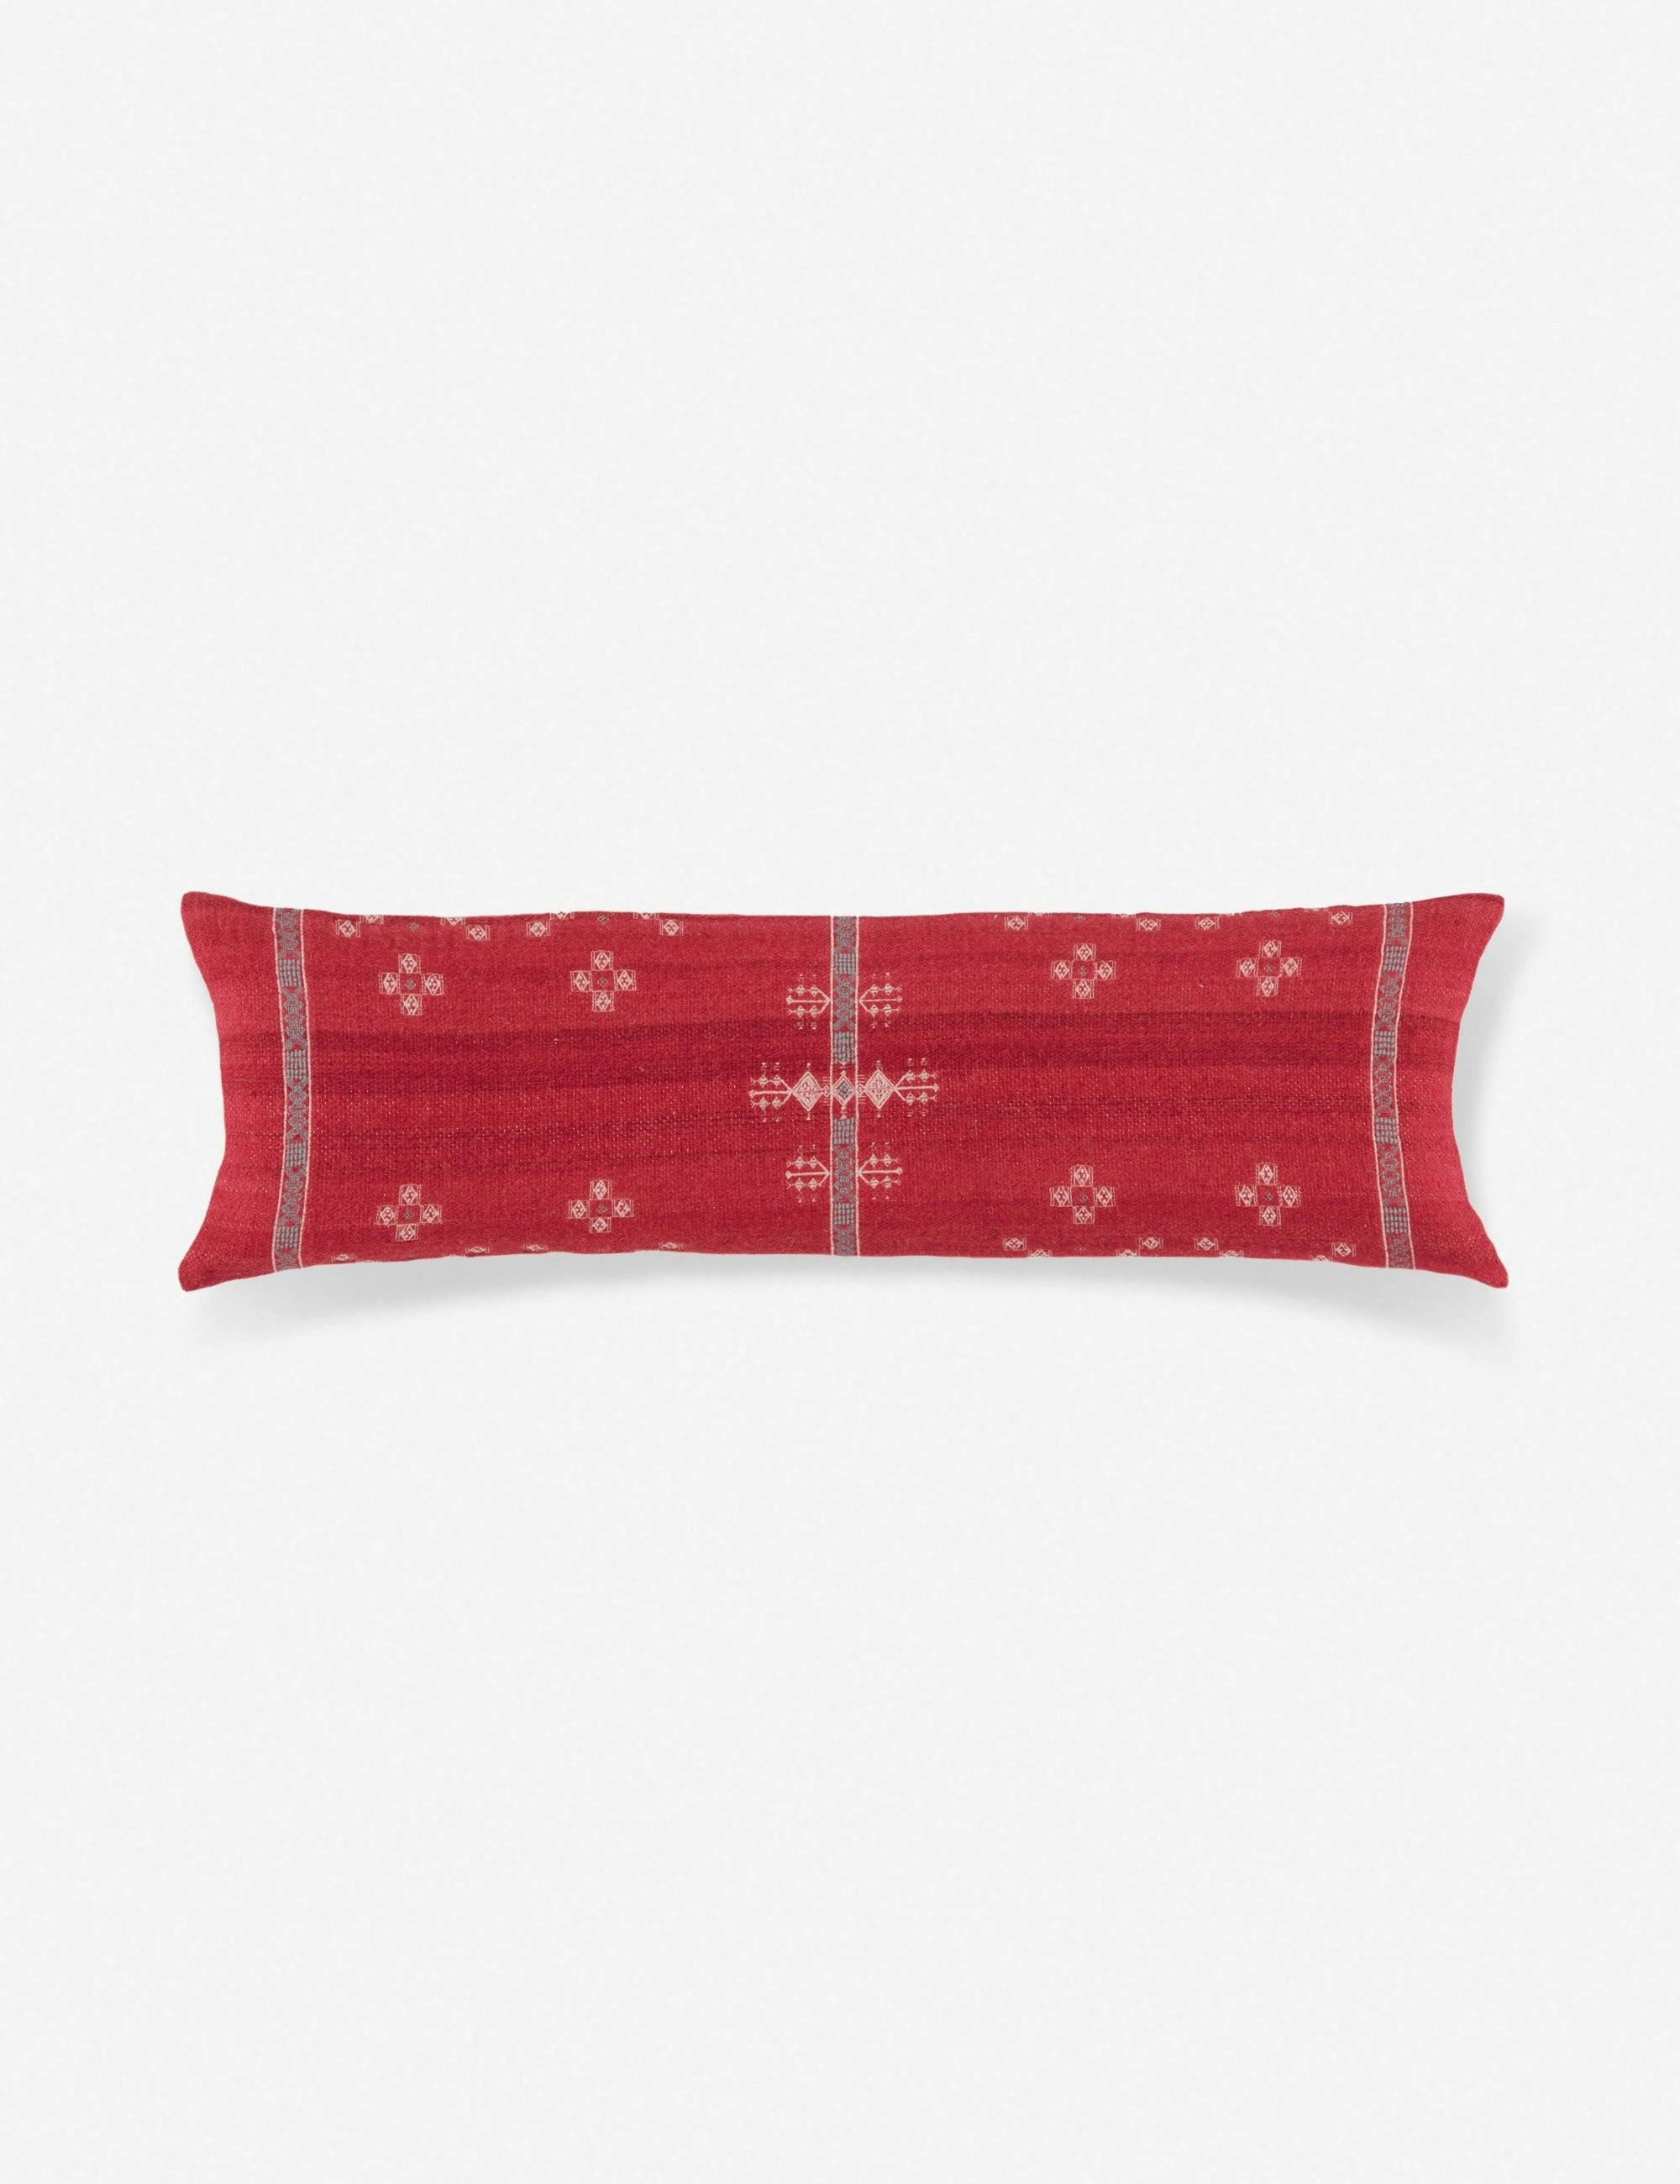 Folk-Inspired Red and Gray Woven Cotton Lumbar Pillow - 48"